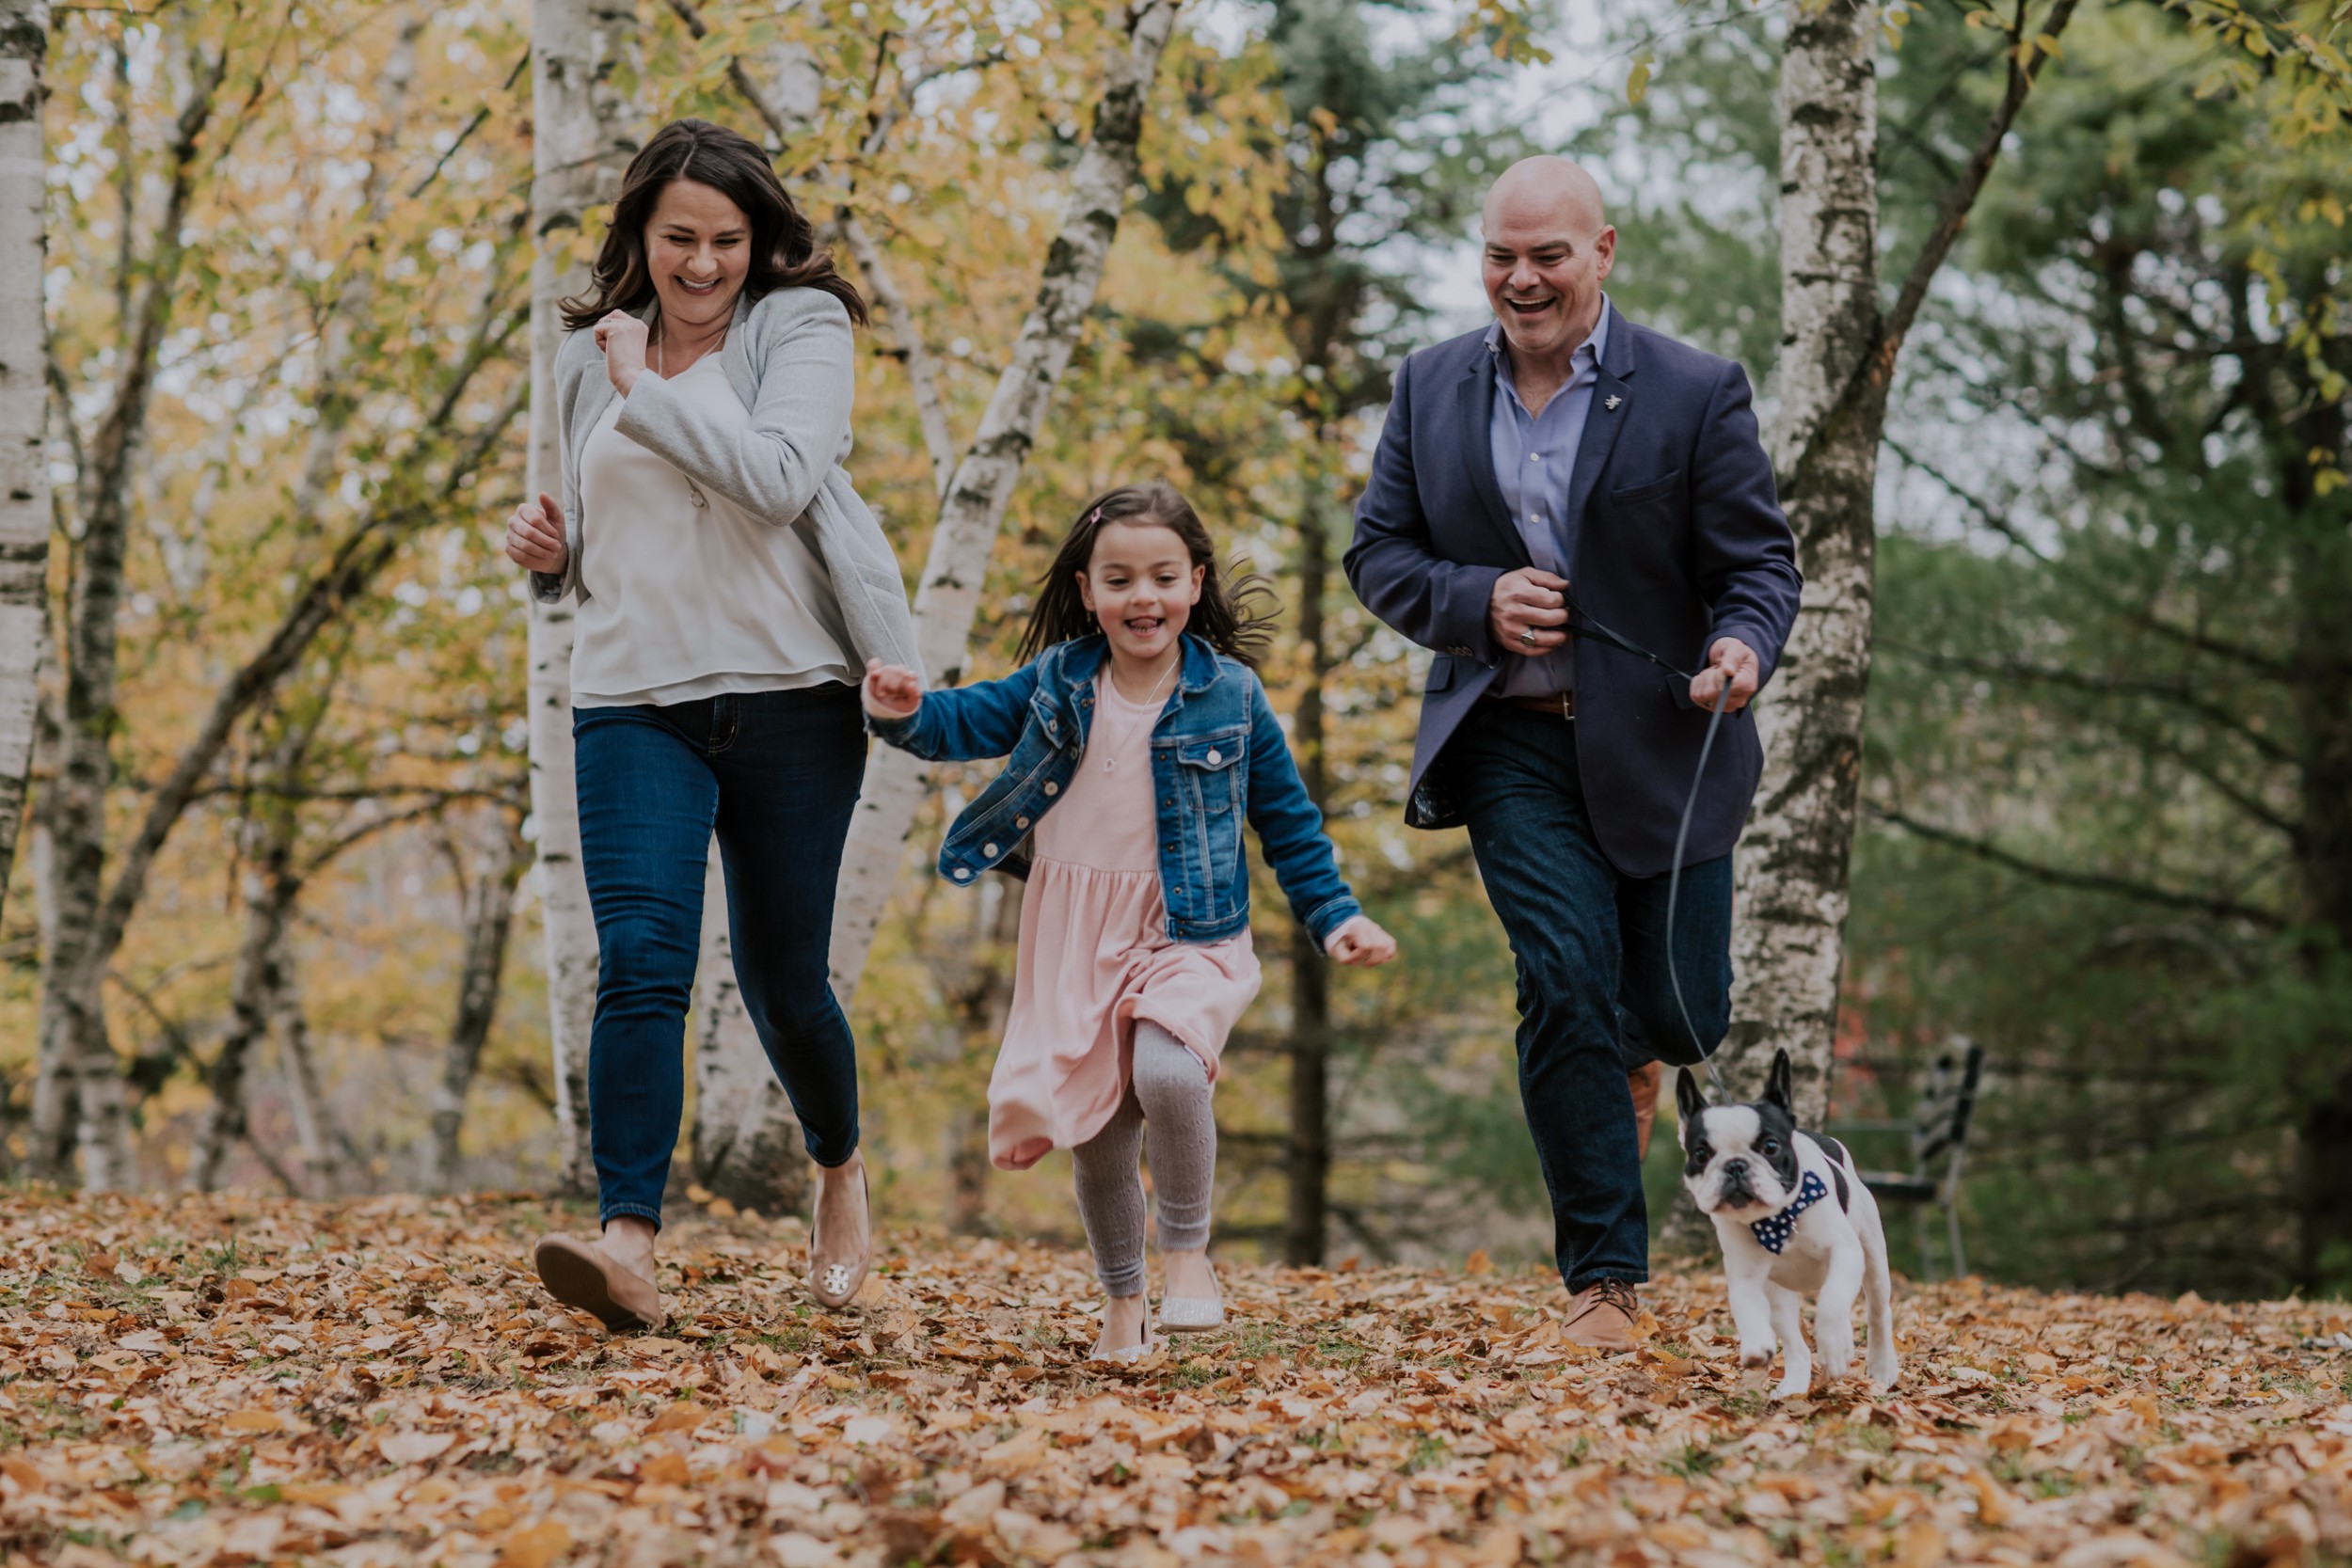 mom, dad, daughter and dog run towards camera lens on fall day